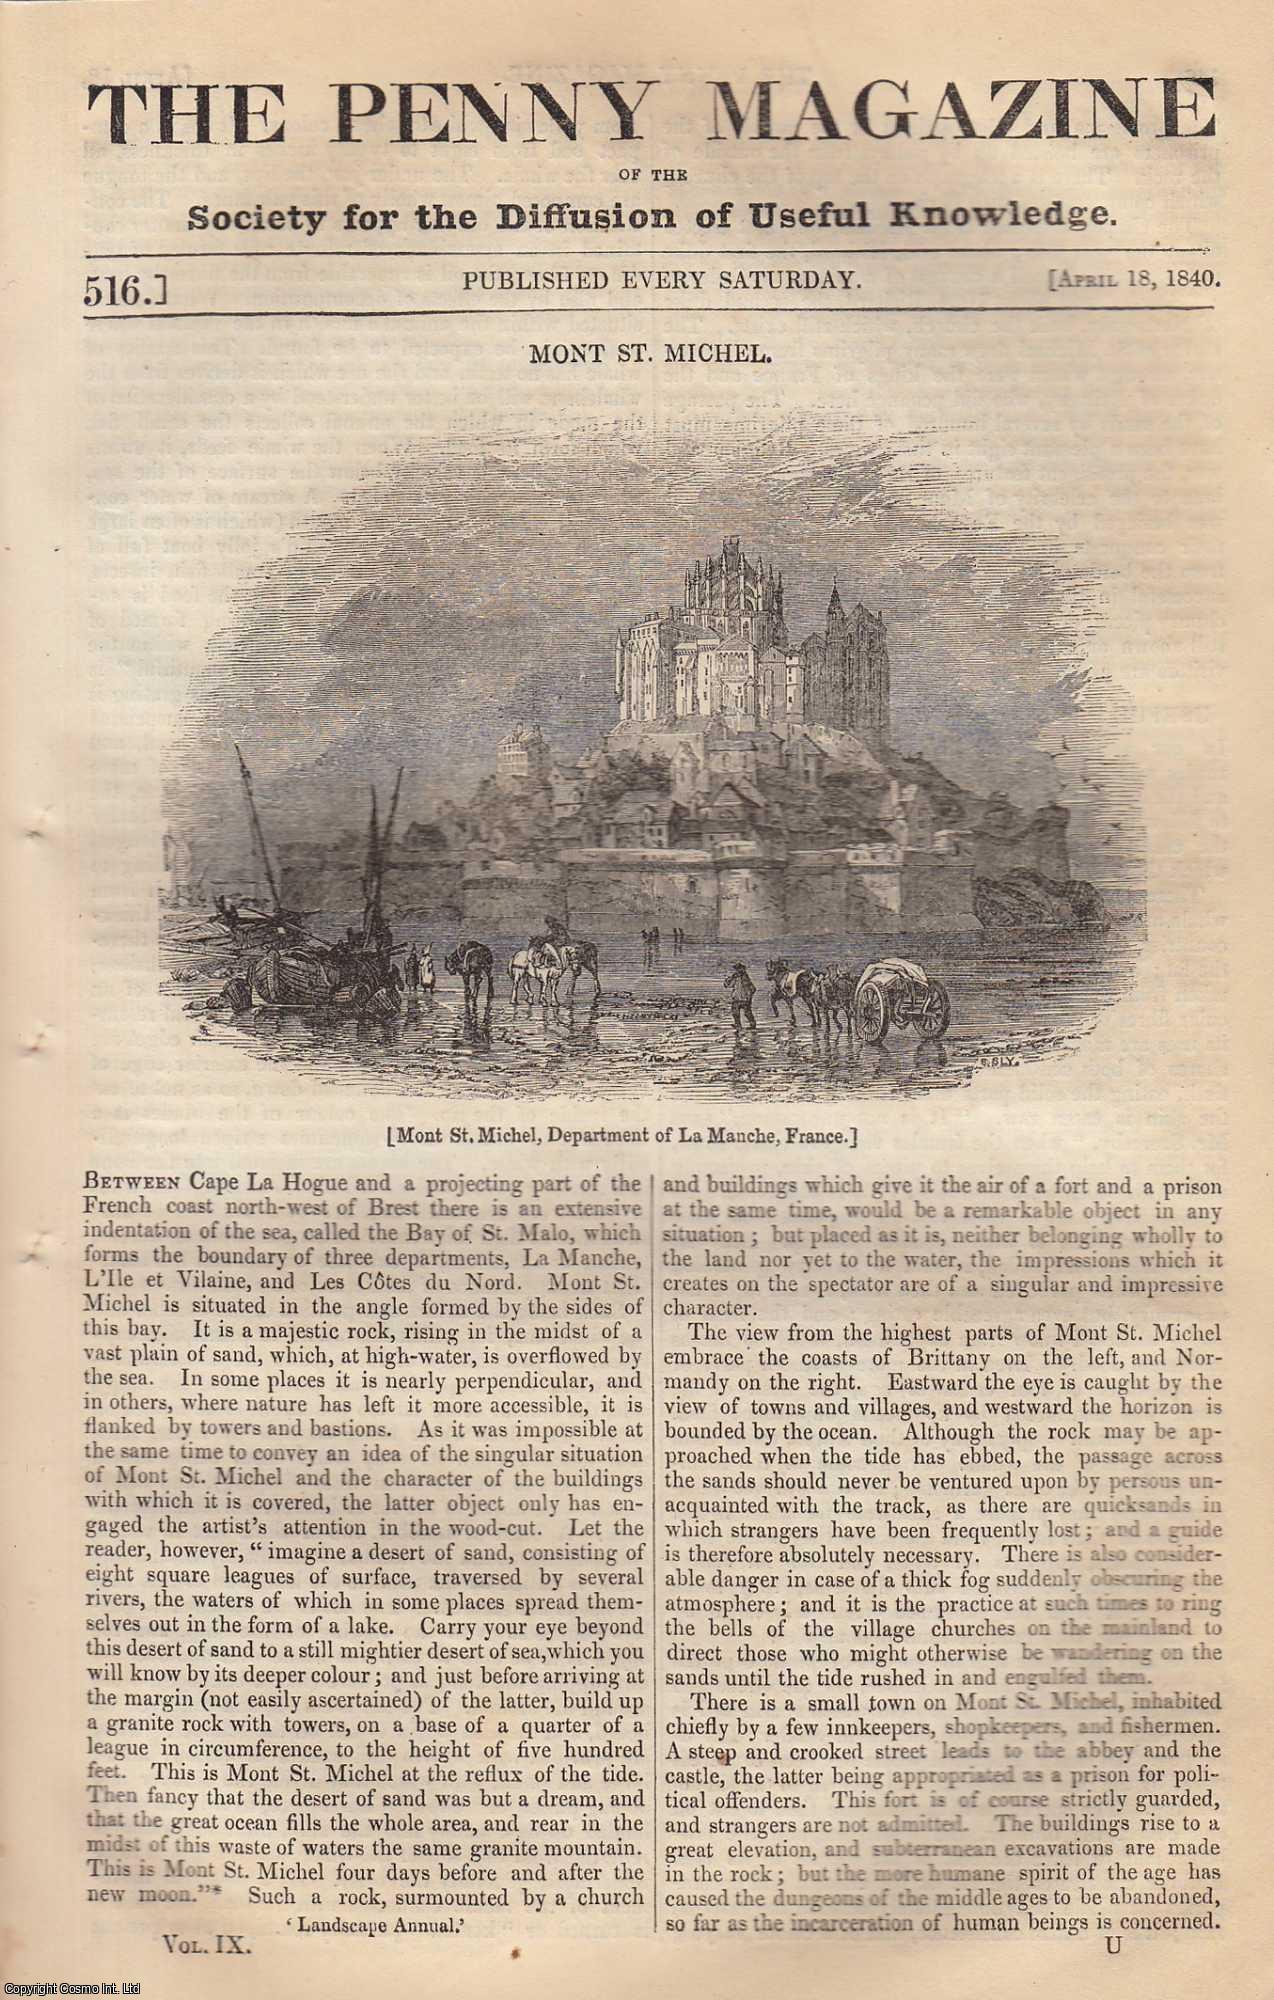 Penny Magazine - Mont St. Michel; Useful Products of The Whale (Part 1); The Newcastle Improvements (Part 3); Account of an Extraordinary Mummy Found in Auvergne. Issue No. 516, April 18th, 1840. A complete original weekly issue of the Penny Magazine, 1840.